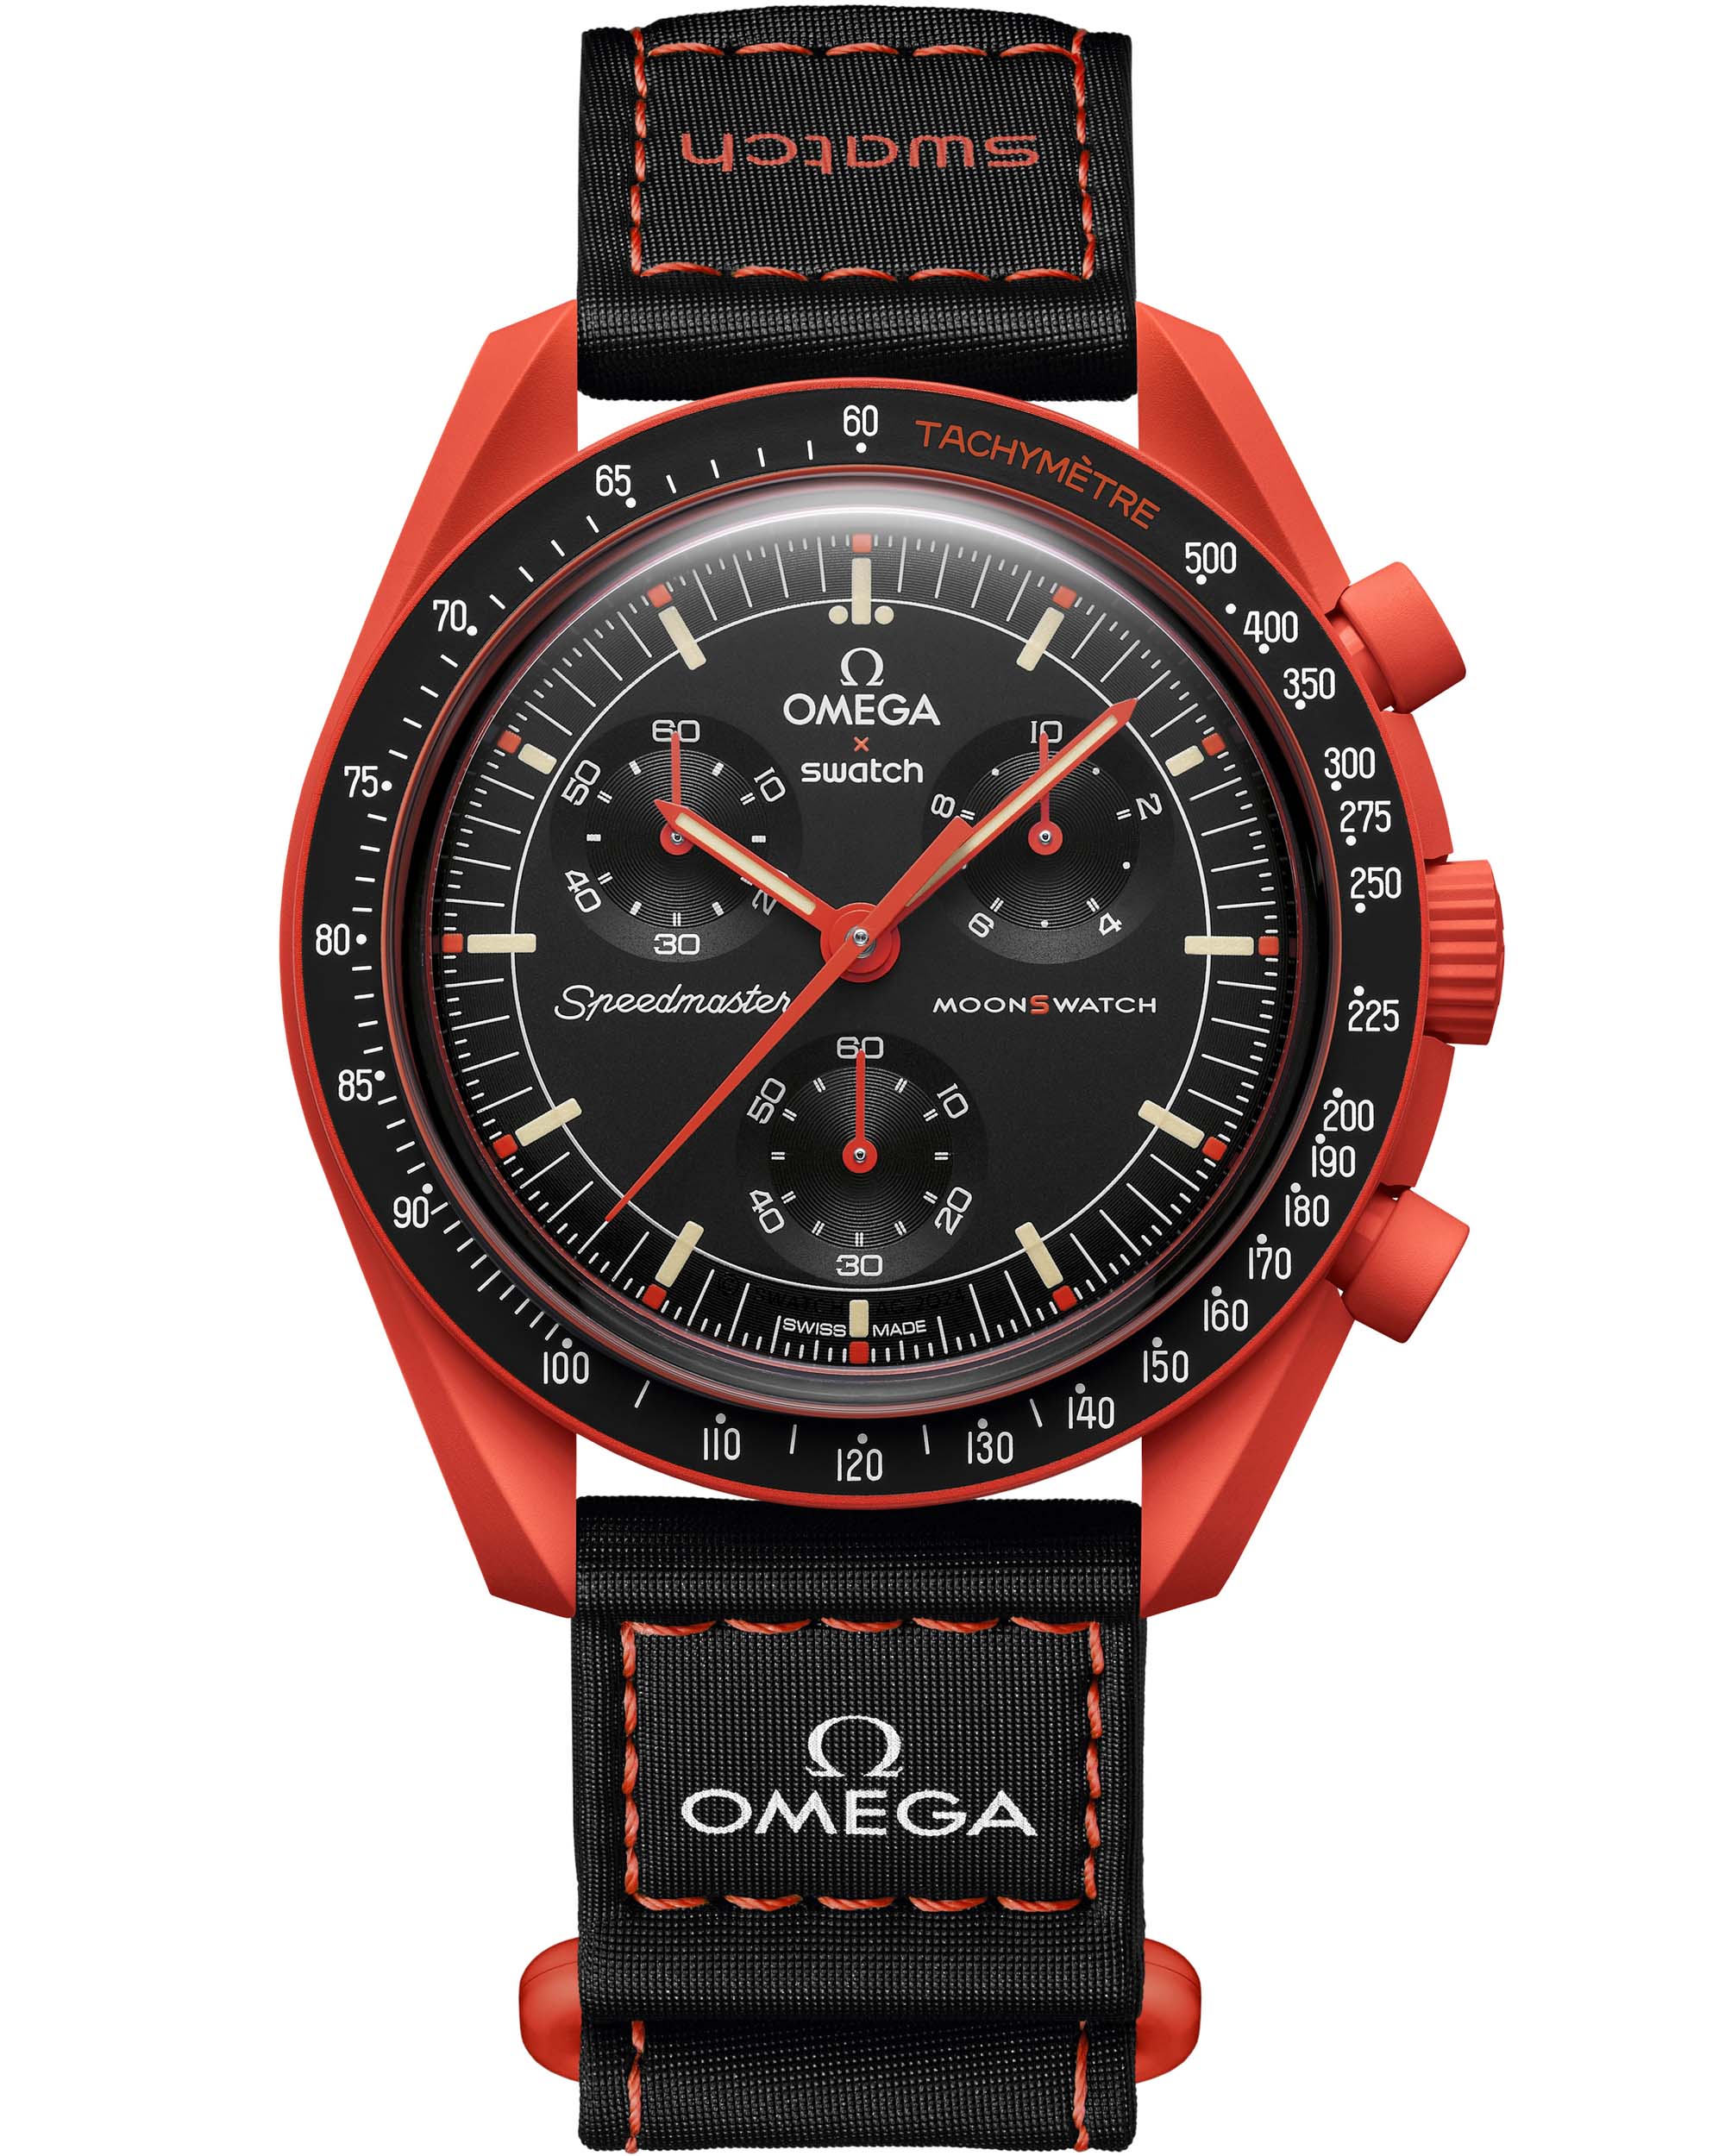 This Omega X Swatch Mission on Earth Lava inspired by the fiery lava flows of Earth, this watch is both stylish and functional for any adventure, available at Cop Underdog In-store and ready to ship.